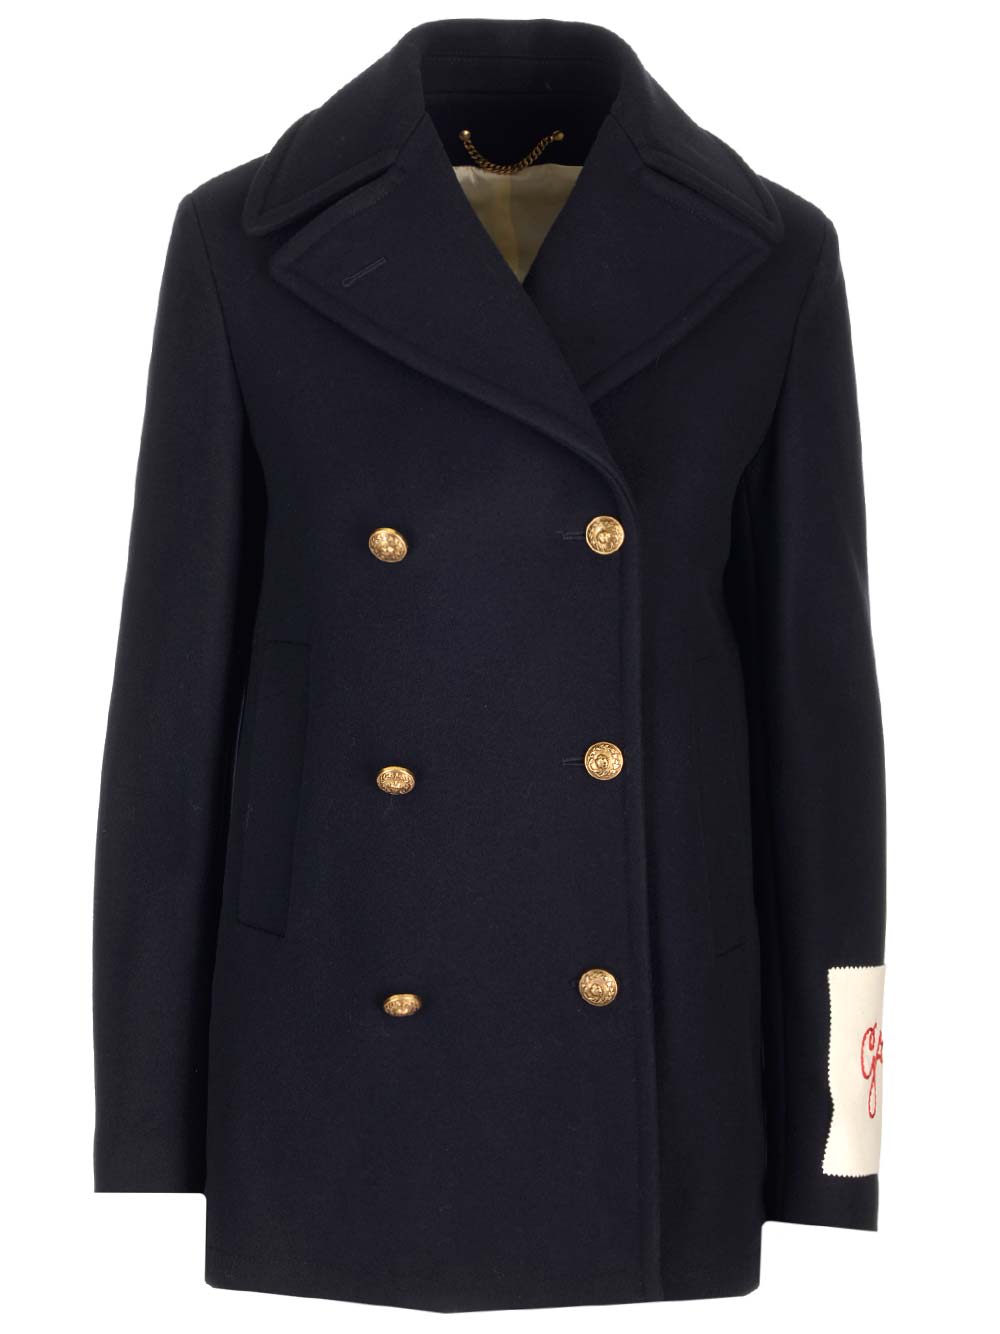 Golden Goose Blue Peacoat With Heraldic Buttons